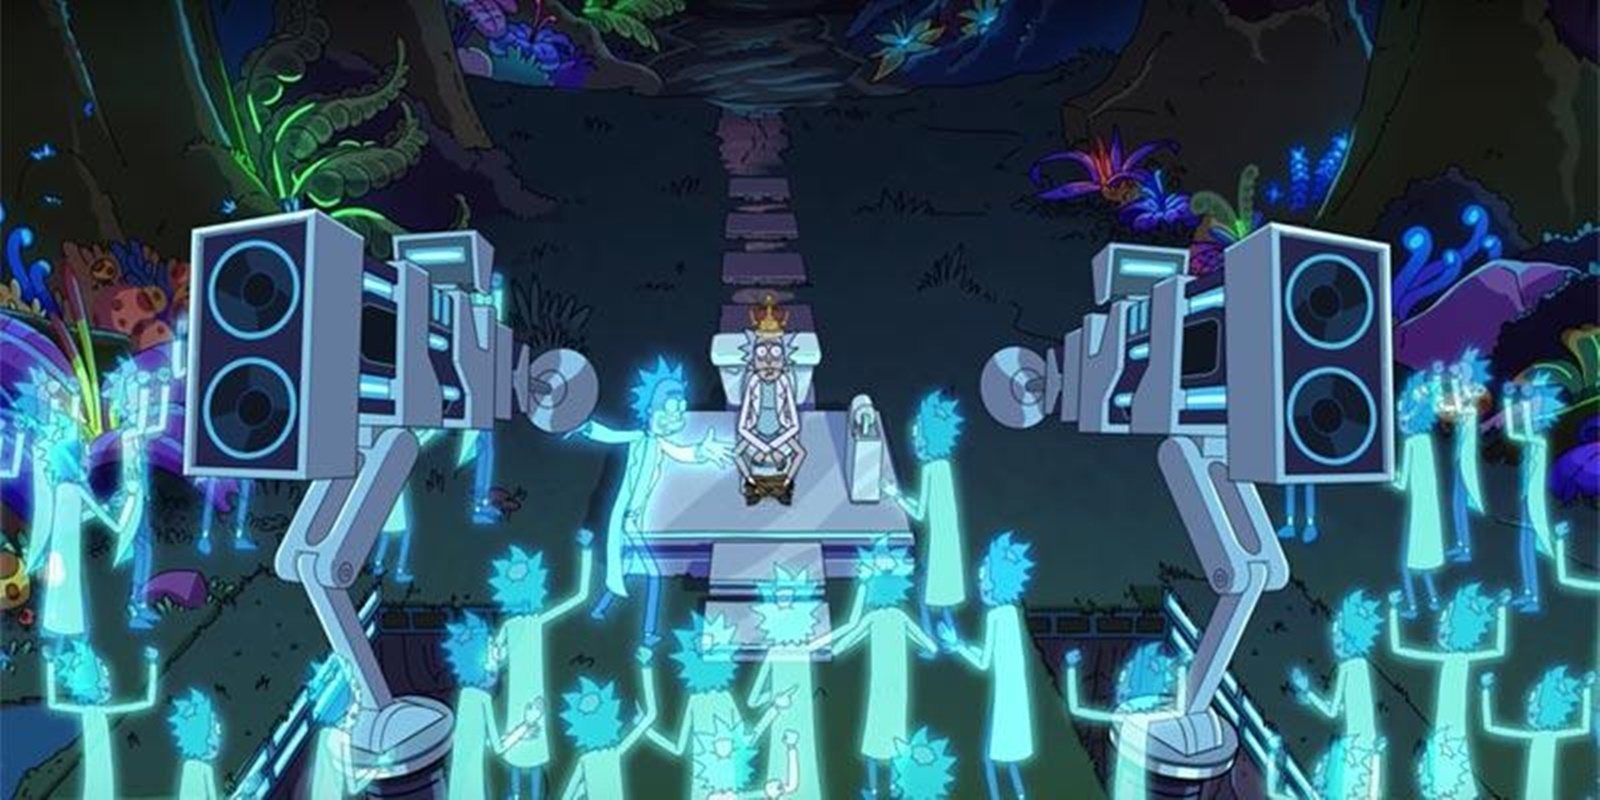 'Rick & Morty' 4x02: "The old man and the seat"